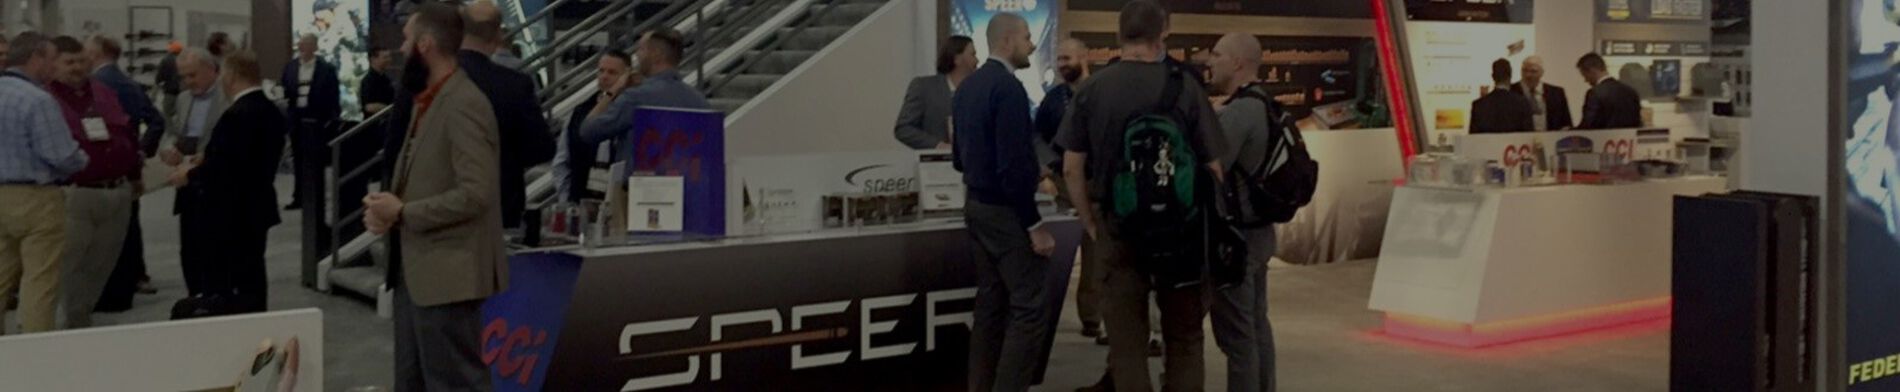 Speer booth at an Event